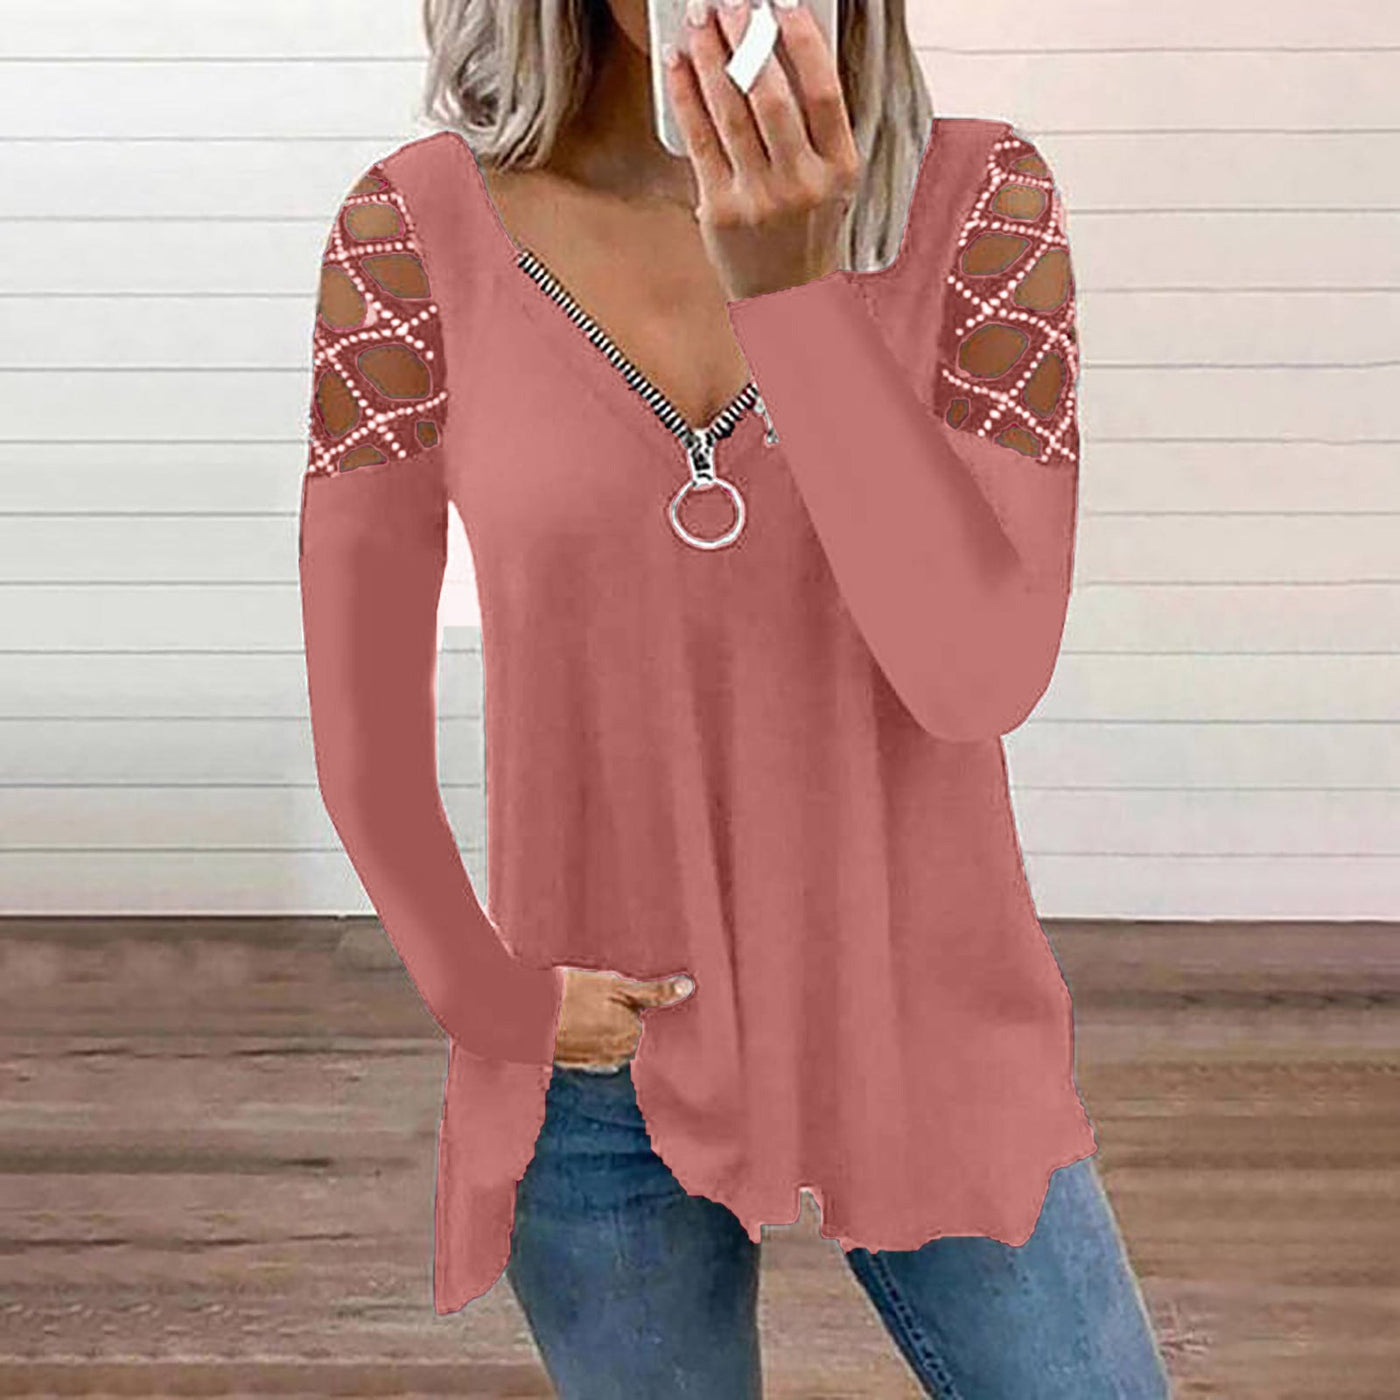 NTG Textile S / Pink Rhinestone Casual Sexy Top